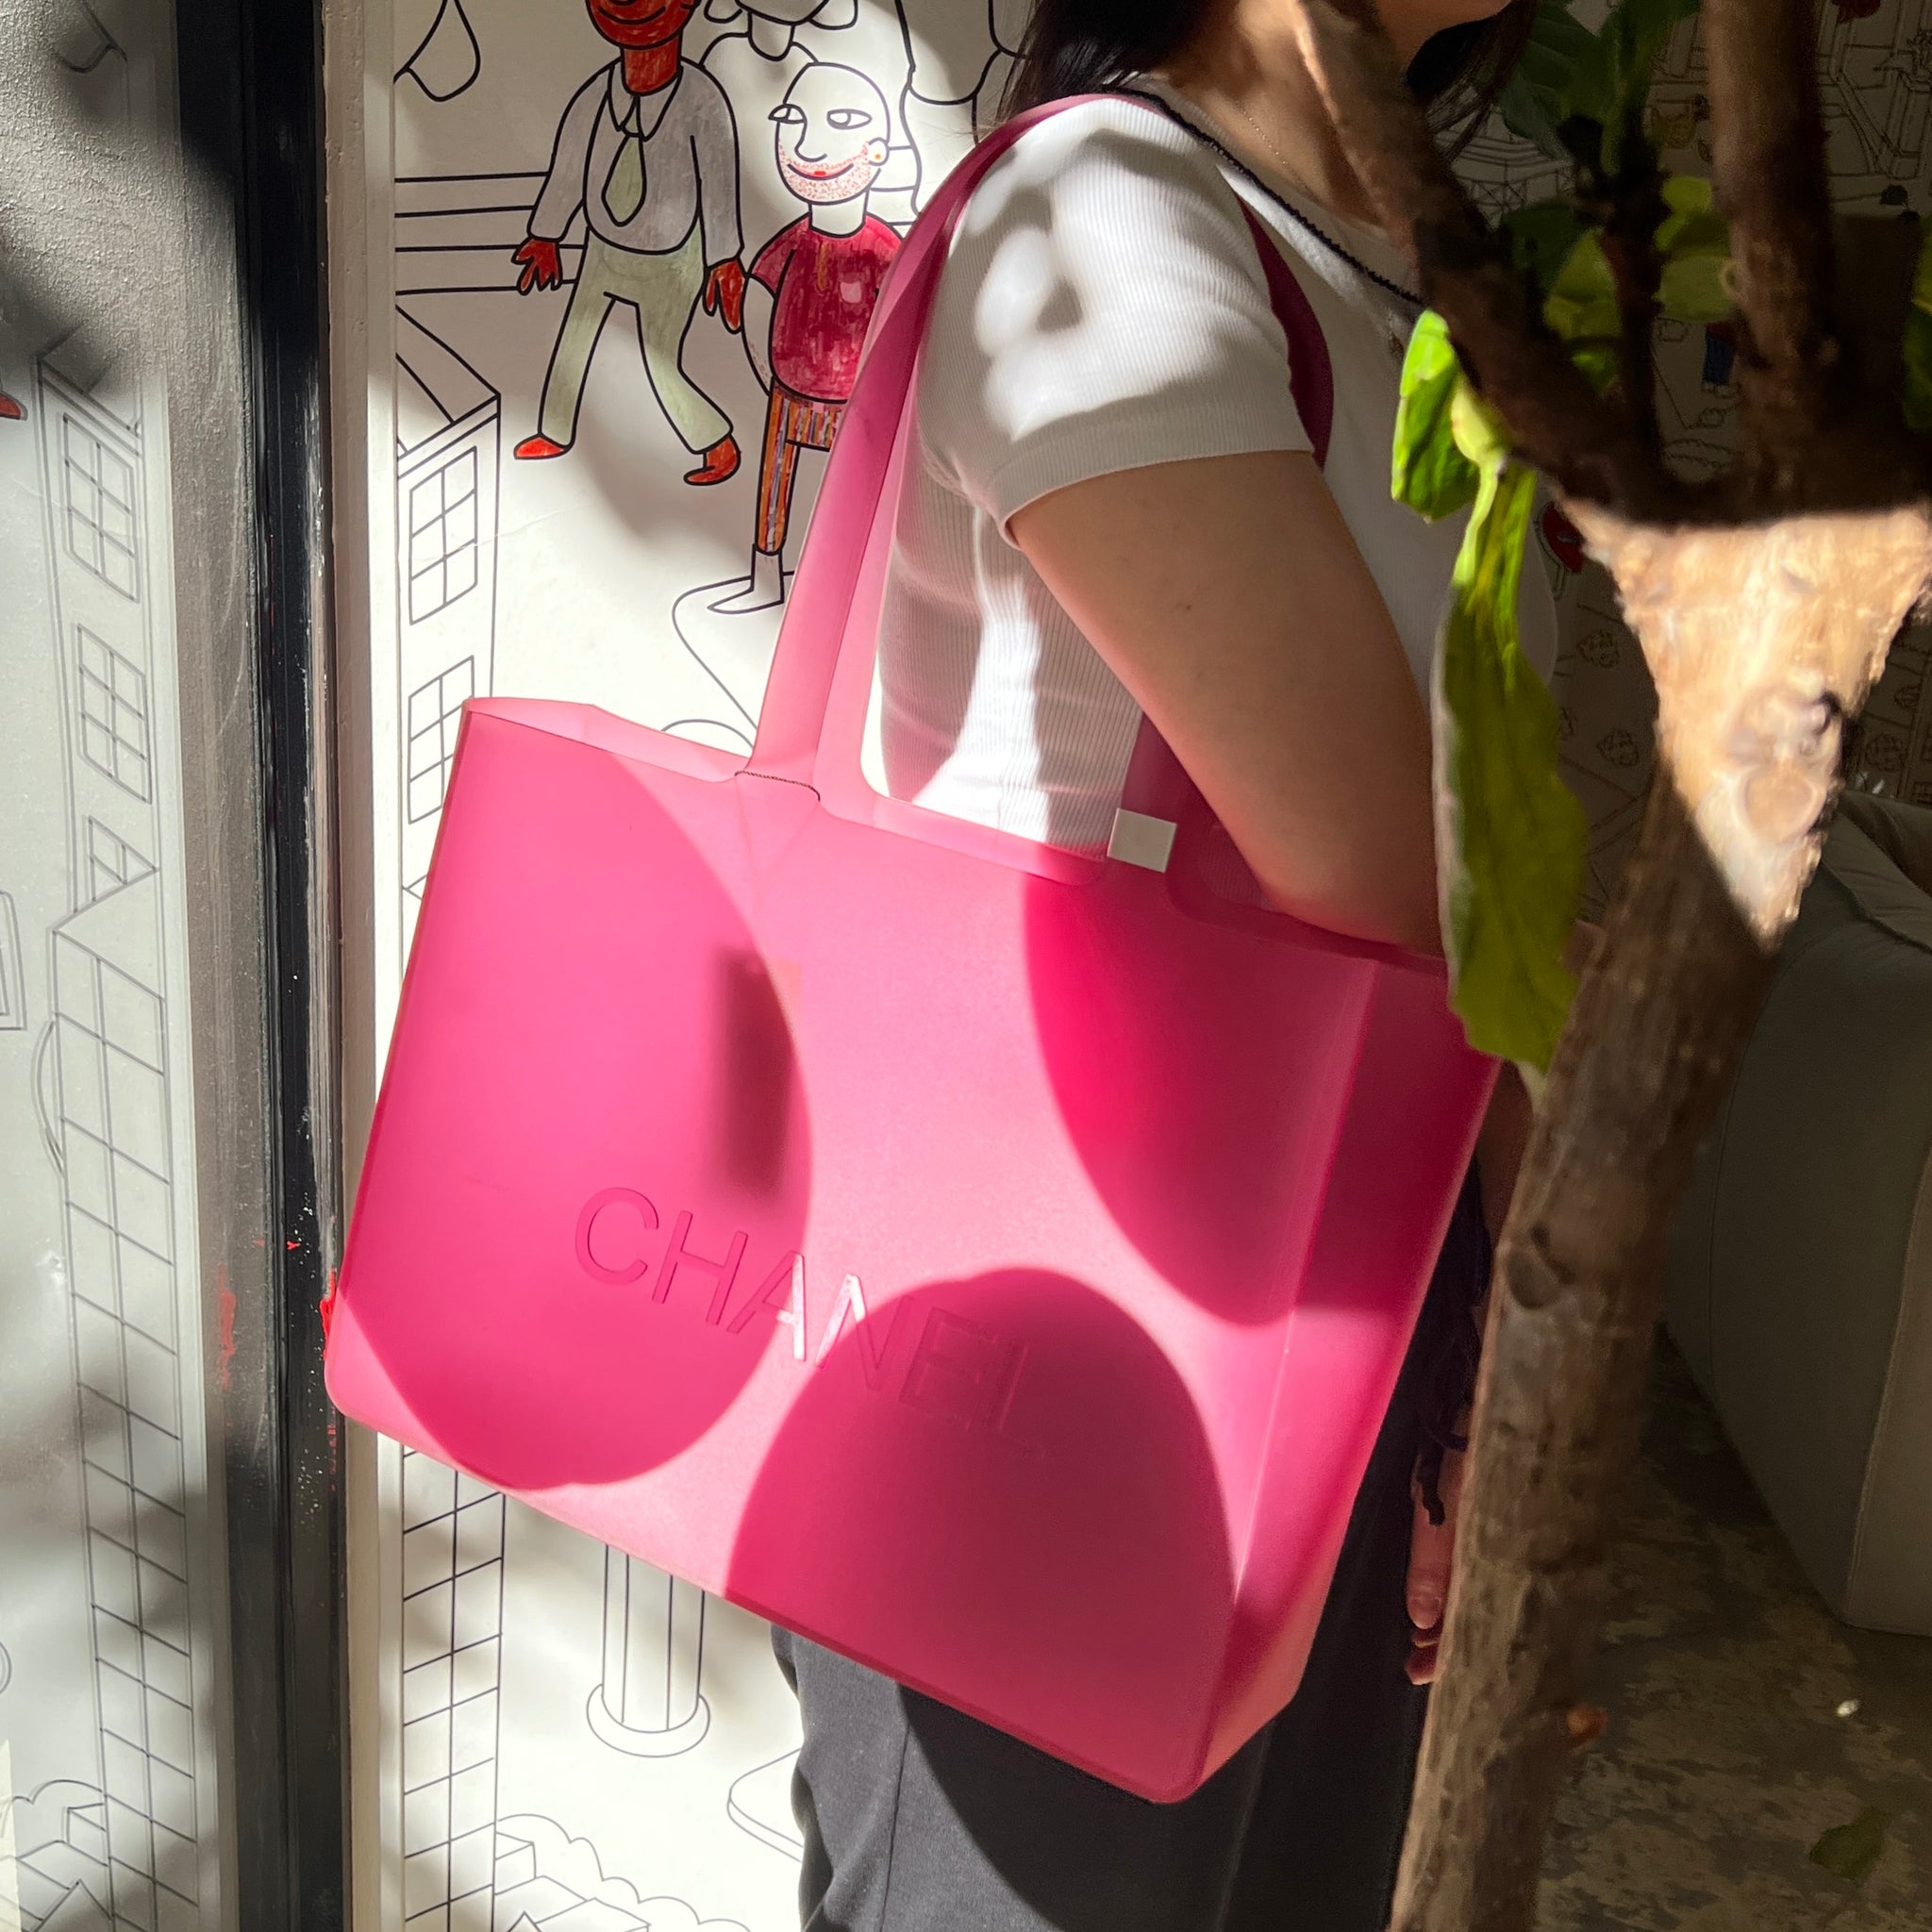 Chanel Chanel Pink Jelly Rubber Shoulder Tote Bag